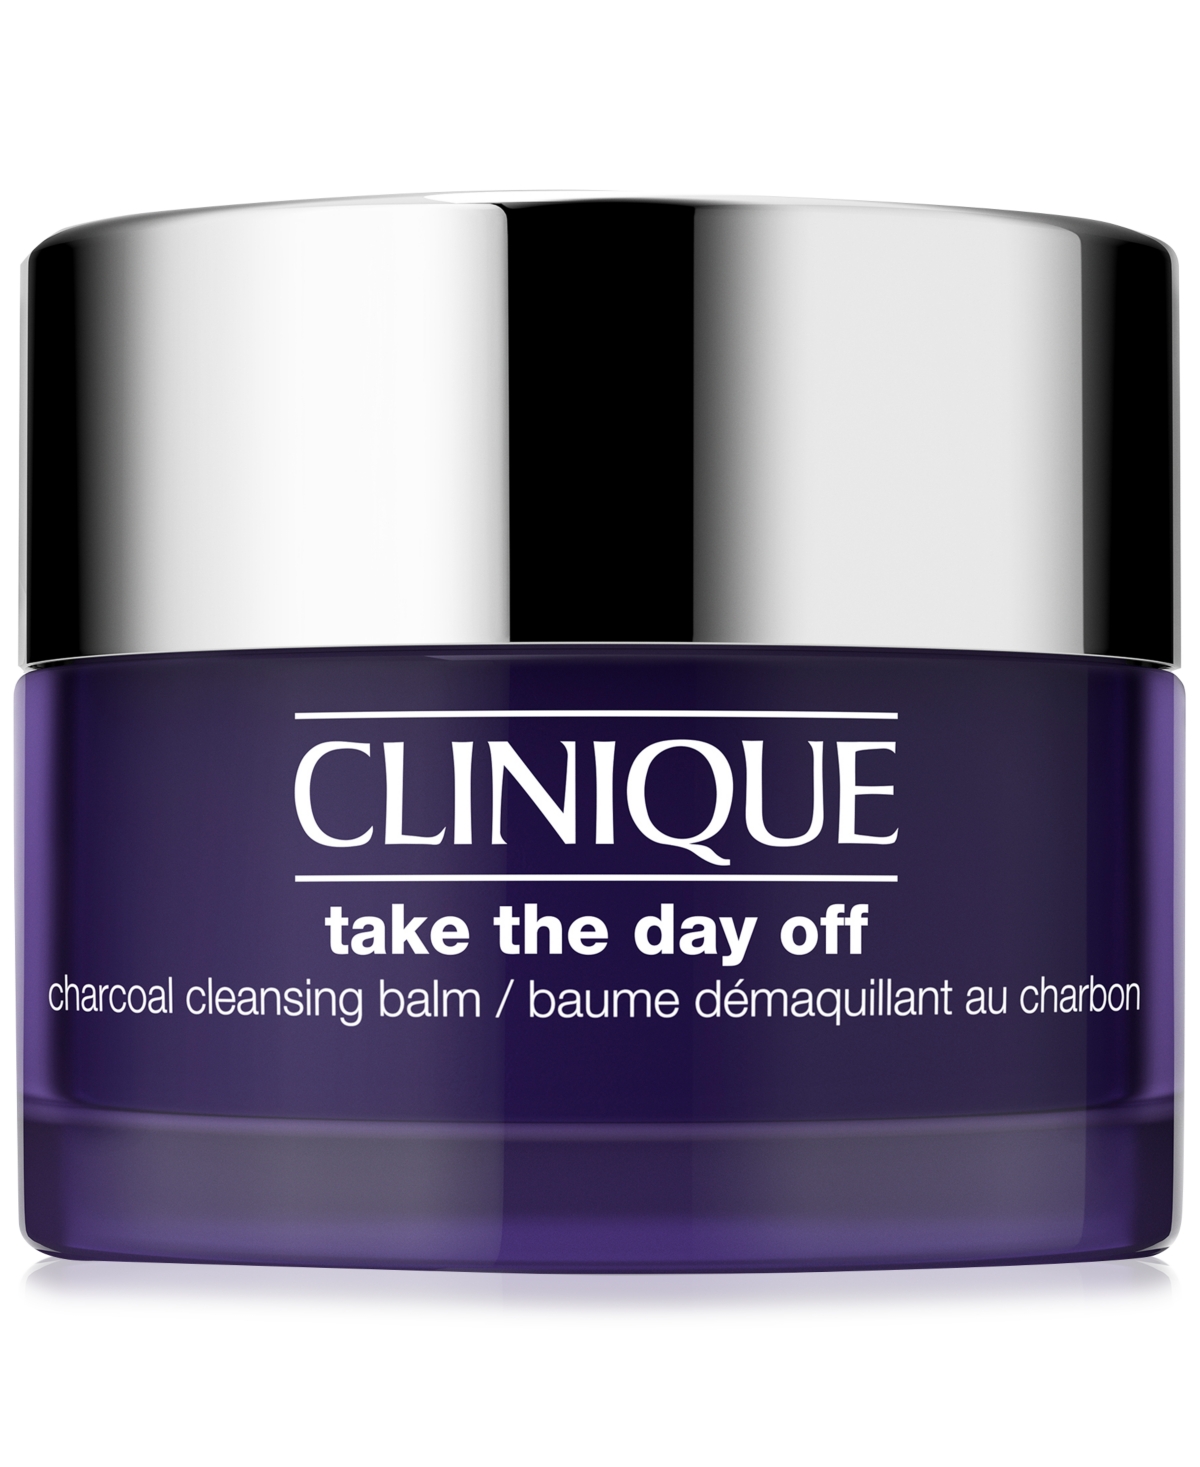 Take The Day Off Charcoal Cleansing Balm Makeup Remover, 1 oz.